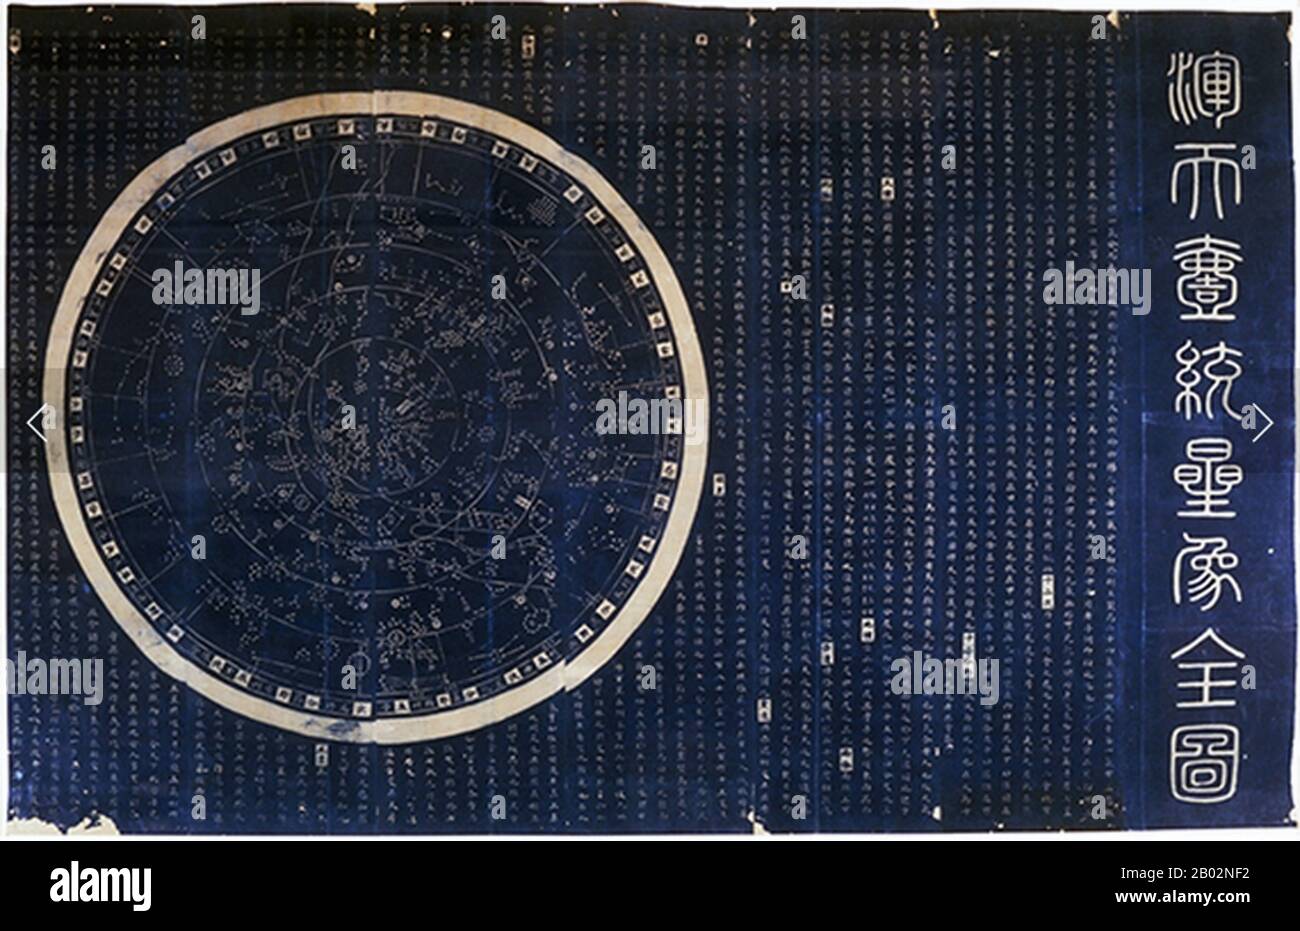 The Hun Tian Yi Tong Xing Xiang Quan Tu (蘇州石刻天文圖) or Suzhou Star Chart (淳祐天文図) indicates 1434 stars grouped into 280 Asterisms in a chart of the Northern Skies. Stock Photo